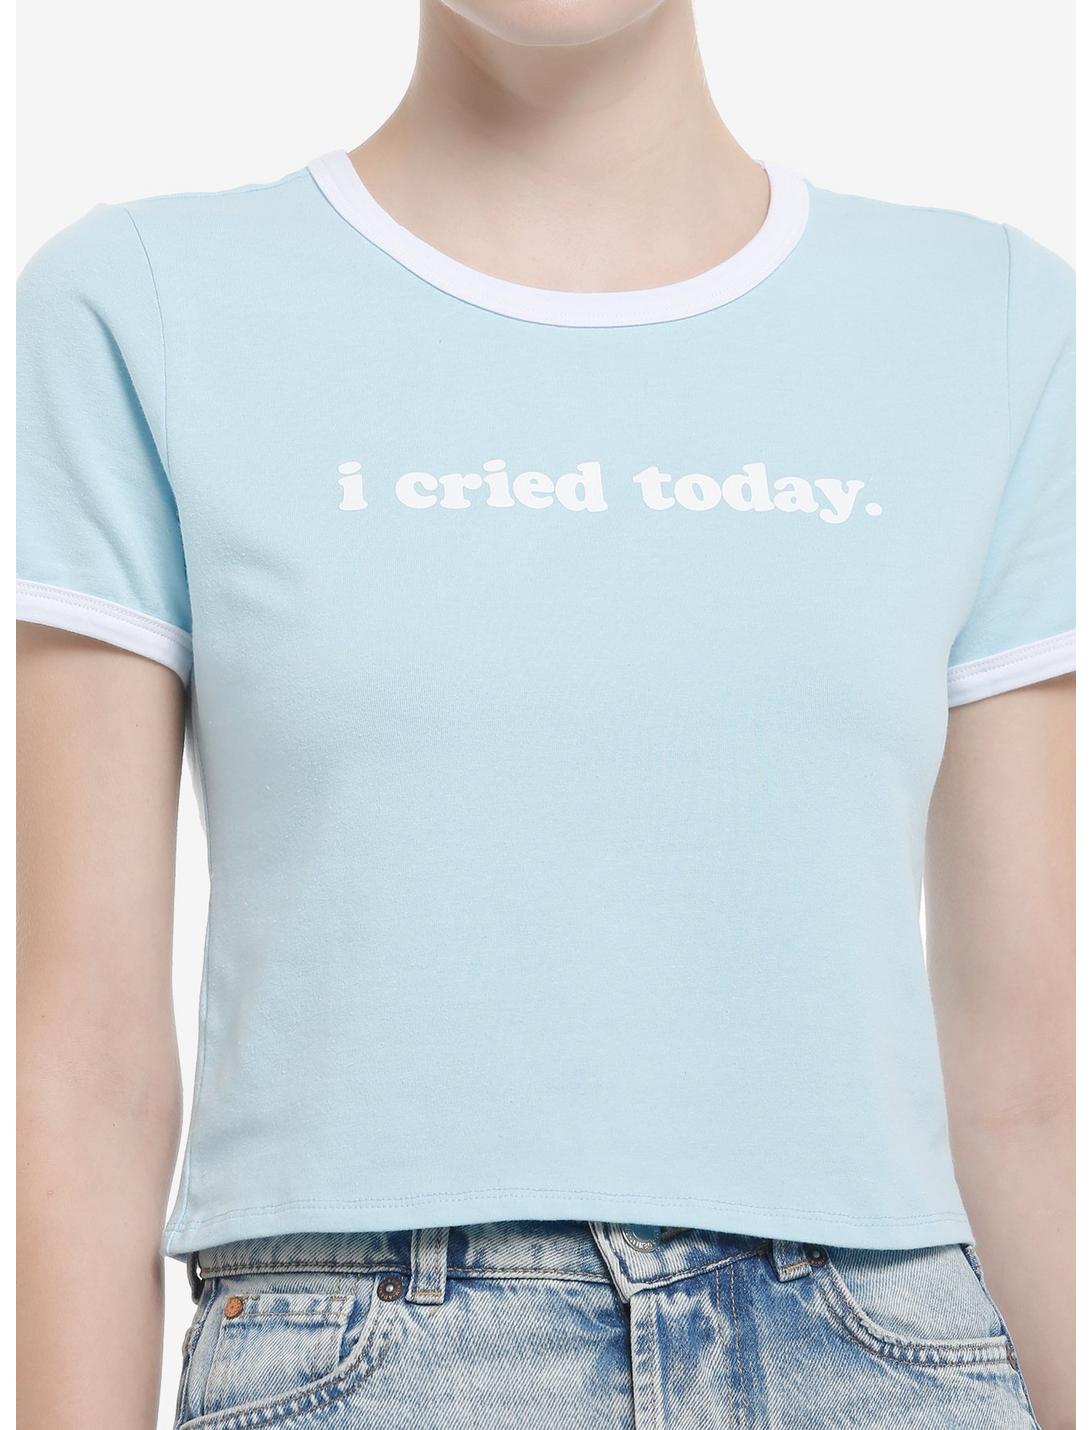 I Cried Today Ringer Girls Baby T-Shirt, , hi-res